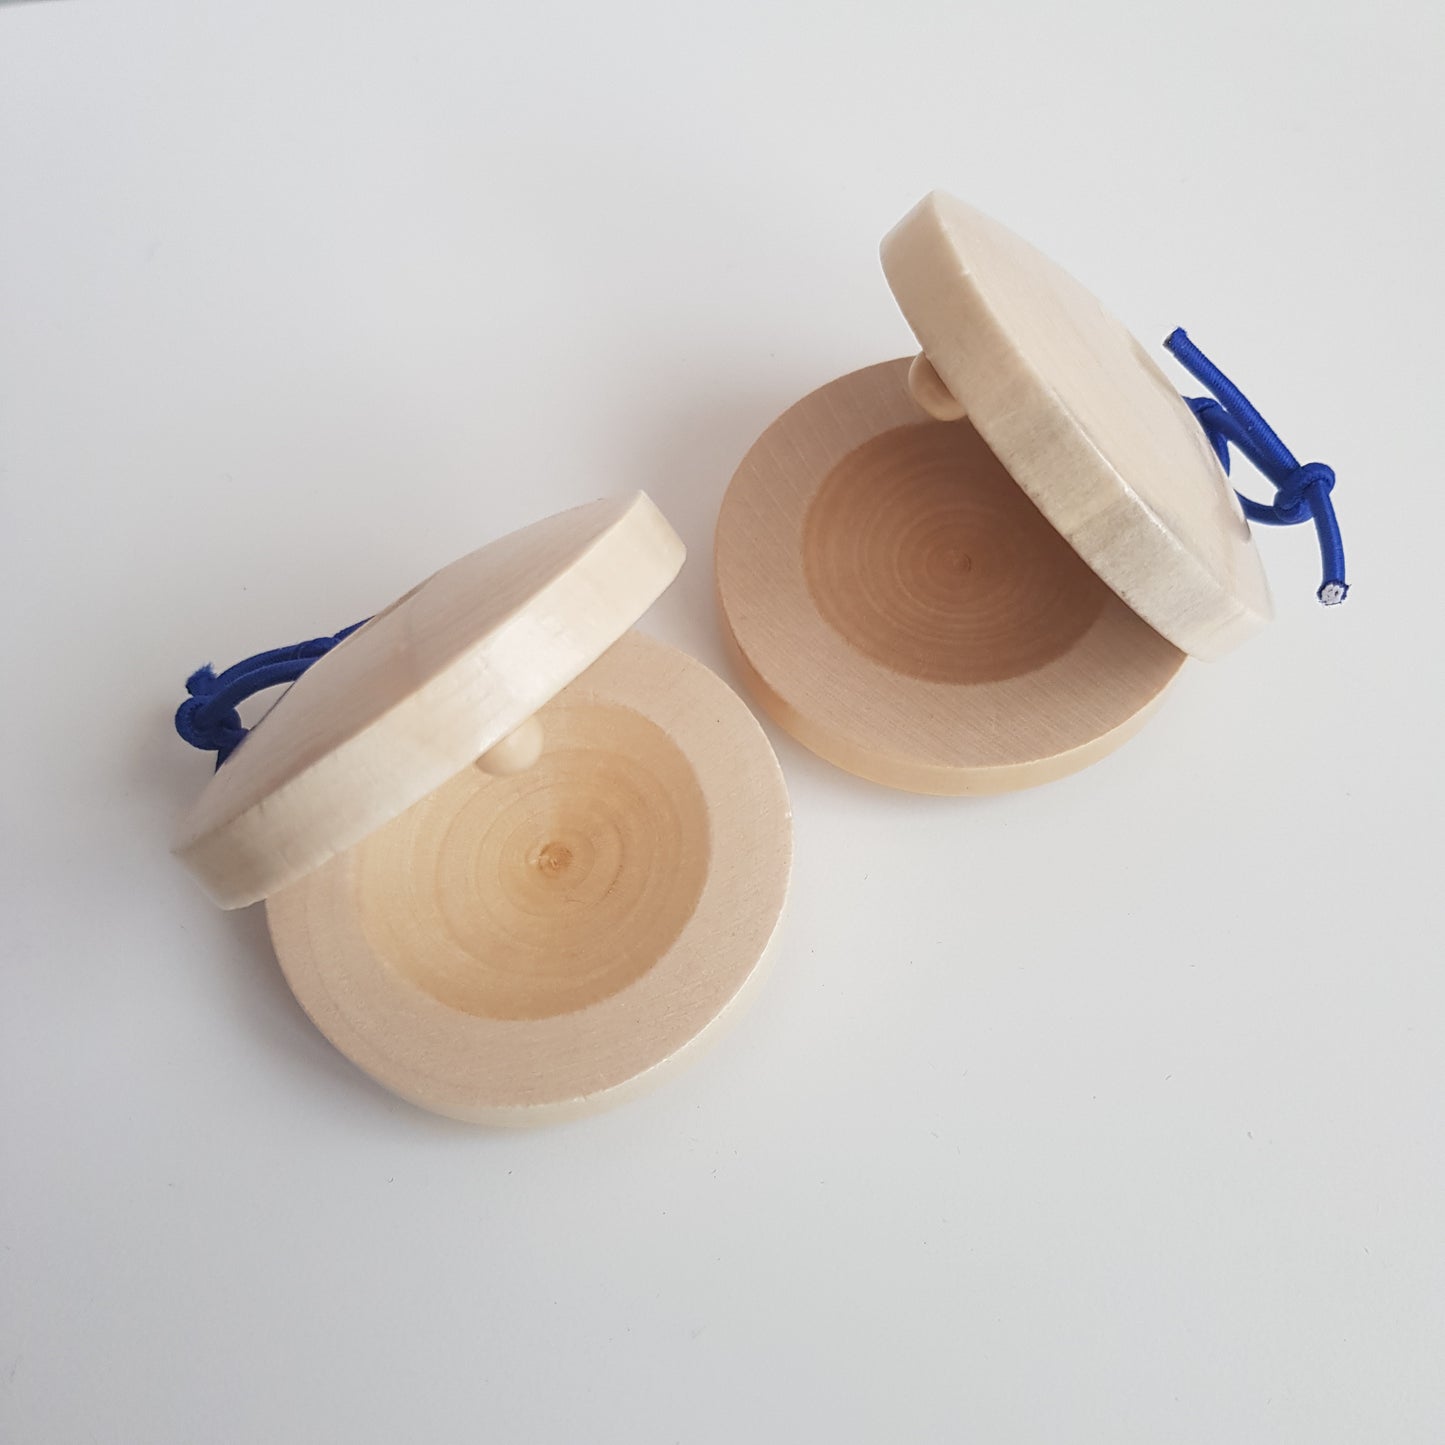 A pair of Castanets Musical Instrument